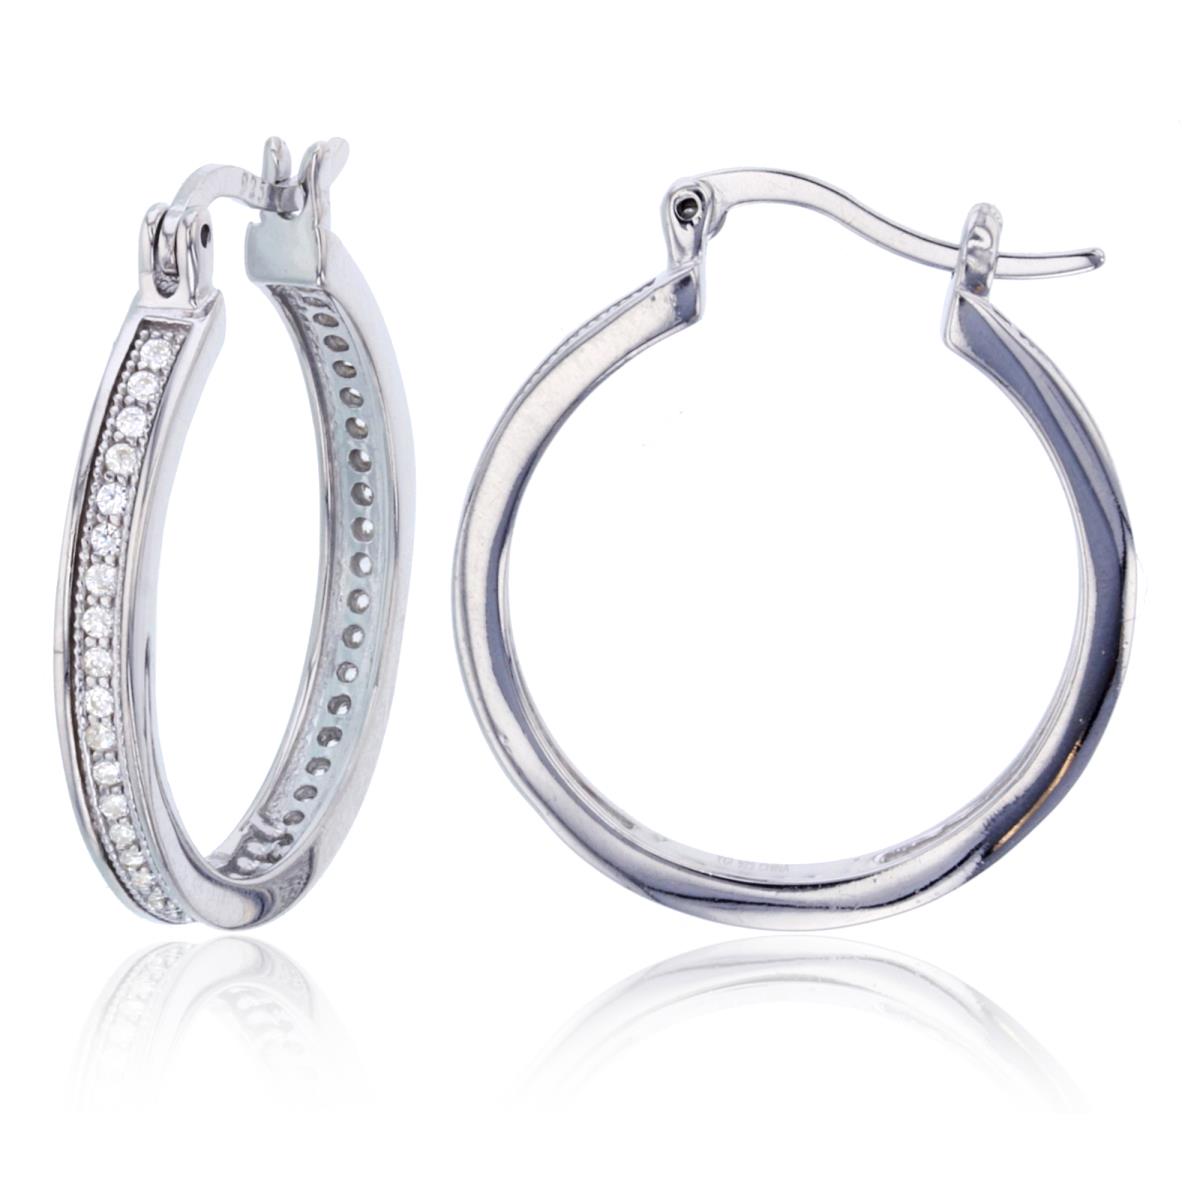 Sterling Silver Micropave 23x3mm Hoops Earring